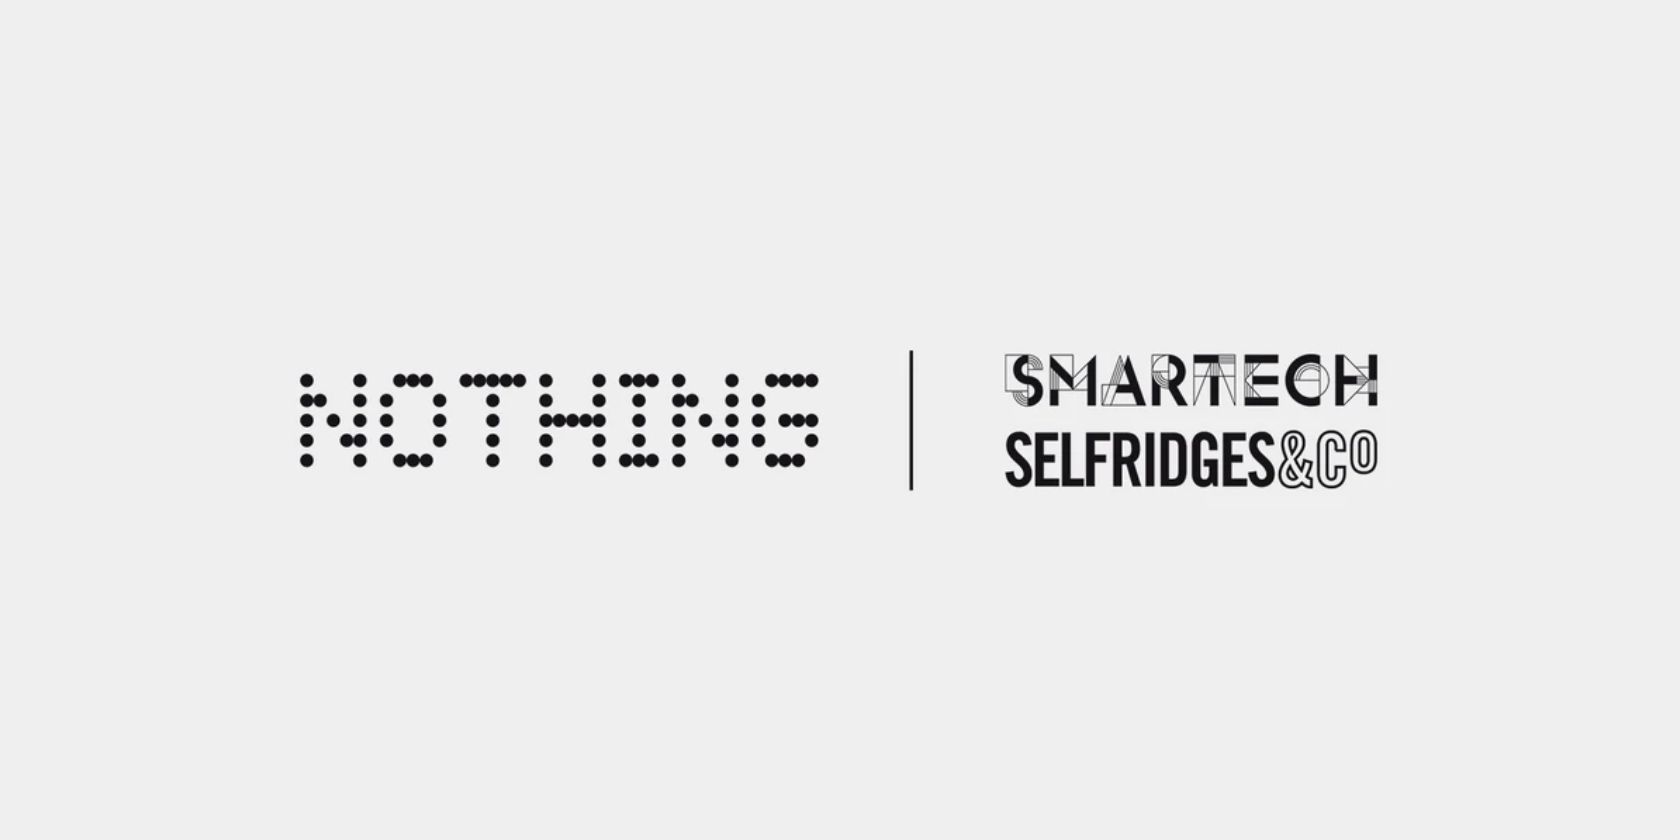 Nothing's graphic of its logo with the Selfridges logo as well.